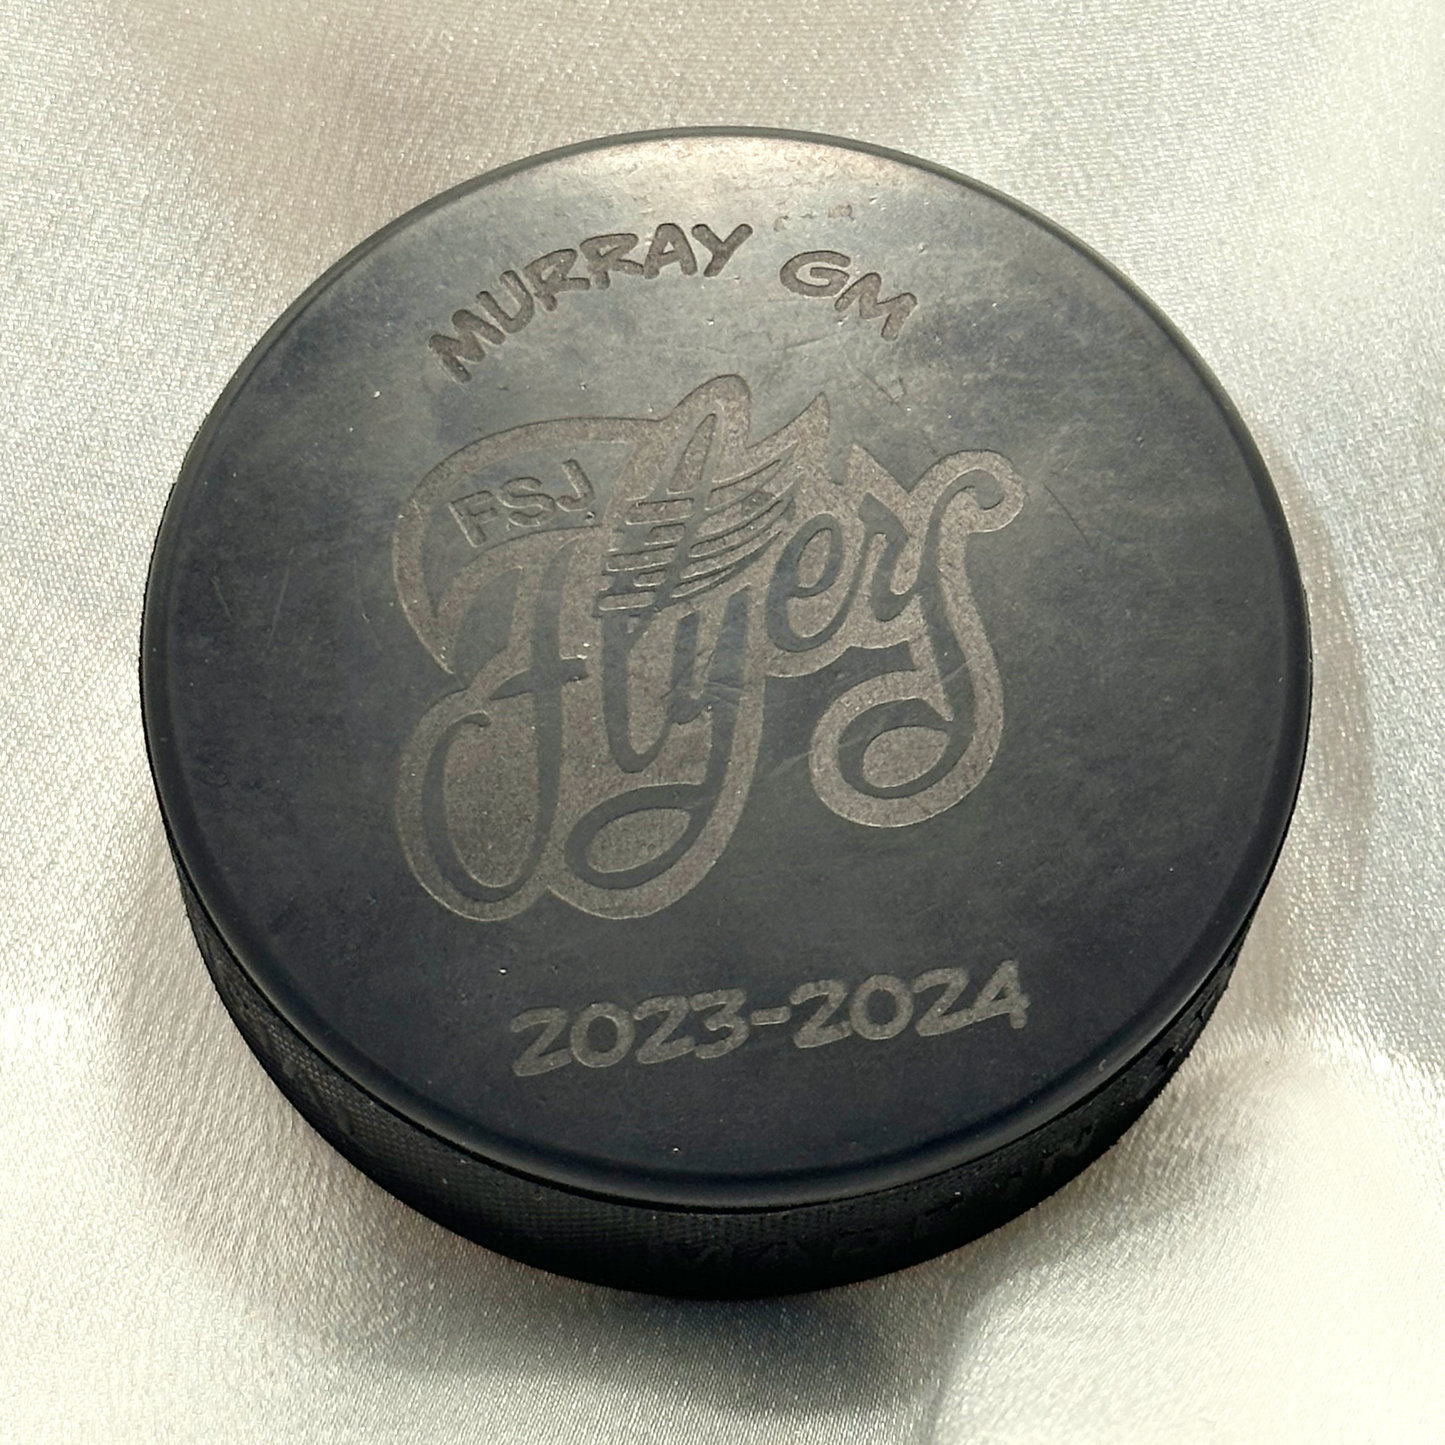 engraved hockey puck sample with Murray GM FSJ Flyers logo and the text 2023-2024 engraved below.